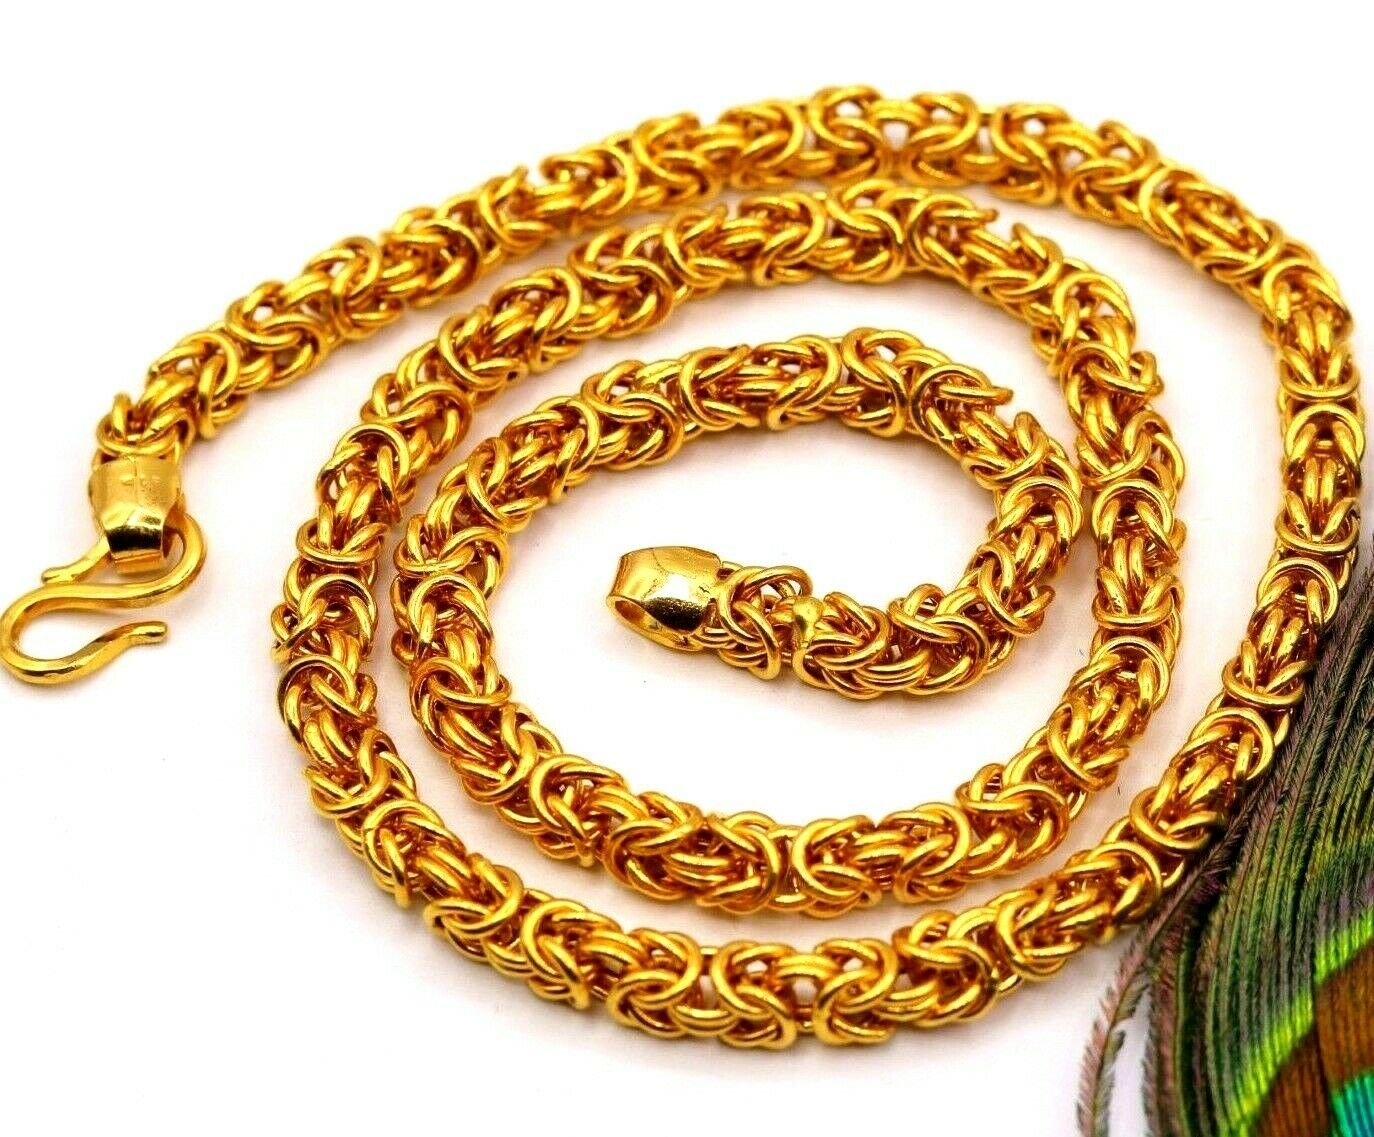 22K GOLD BYZANTINE CHAIN NECKLACE 20 INCHES ROYAL HALLMARKED JEWELRY INDIA CH181